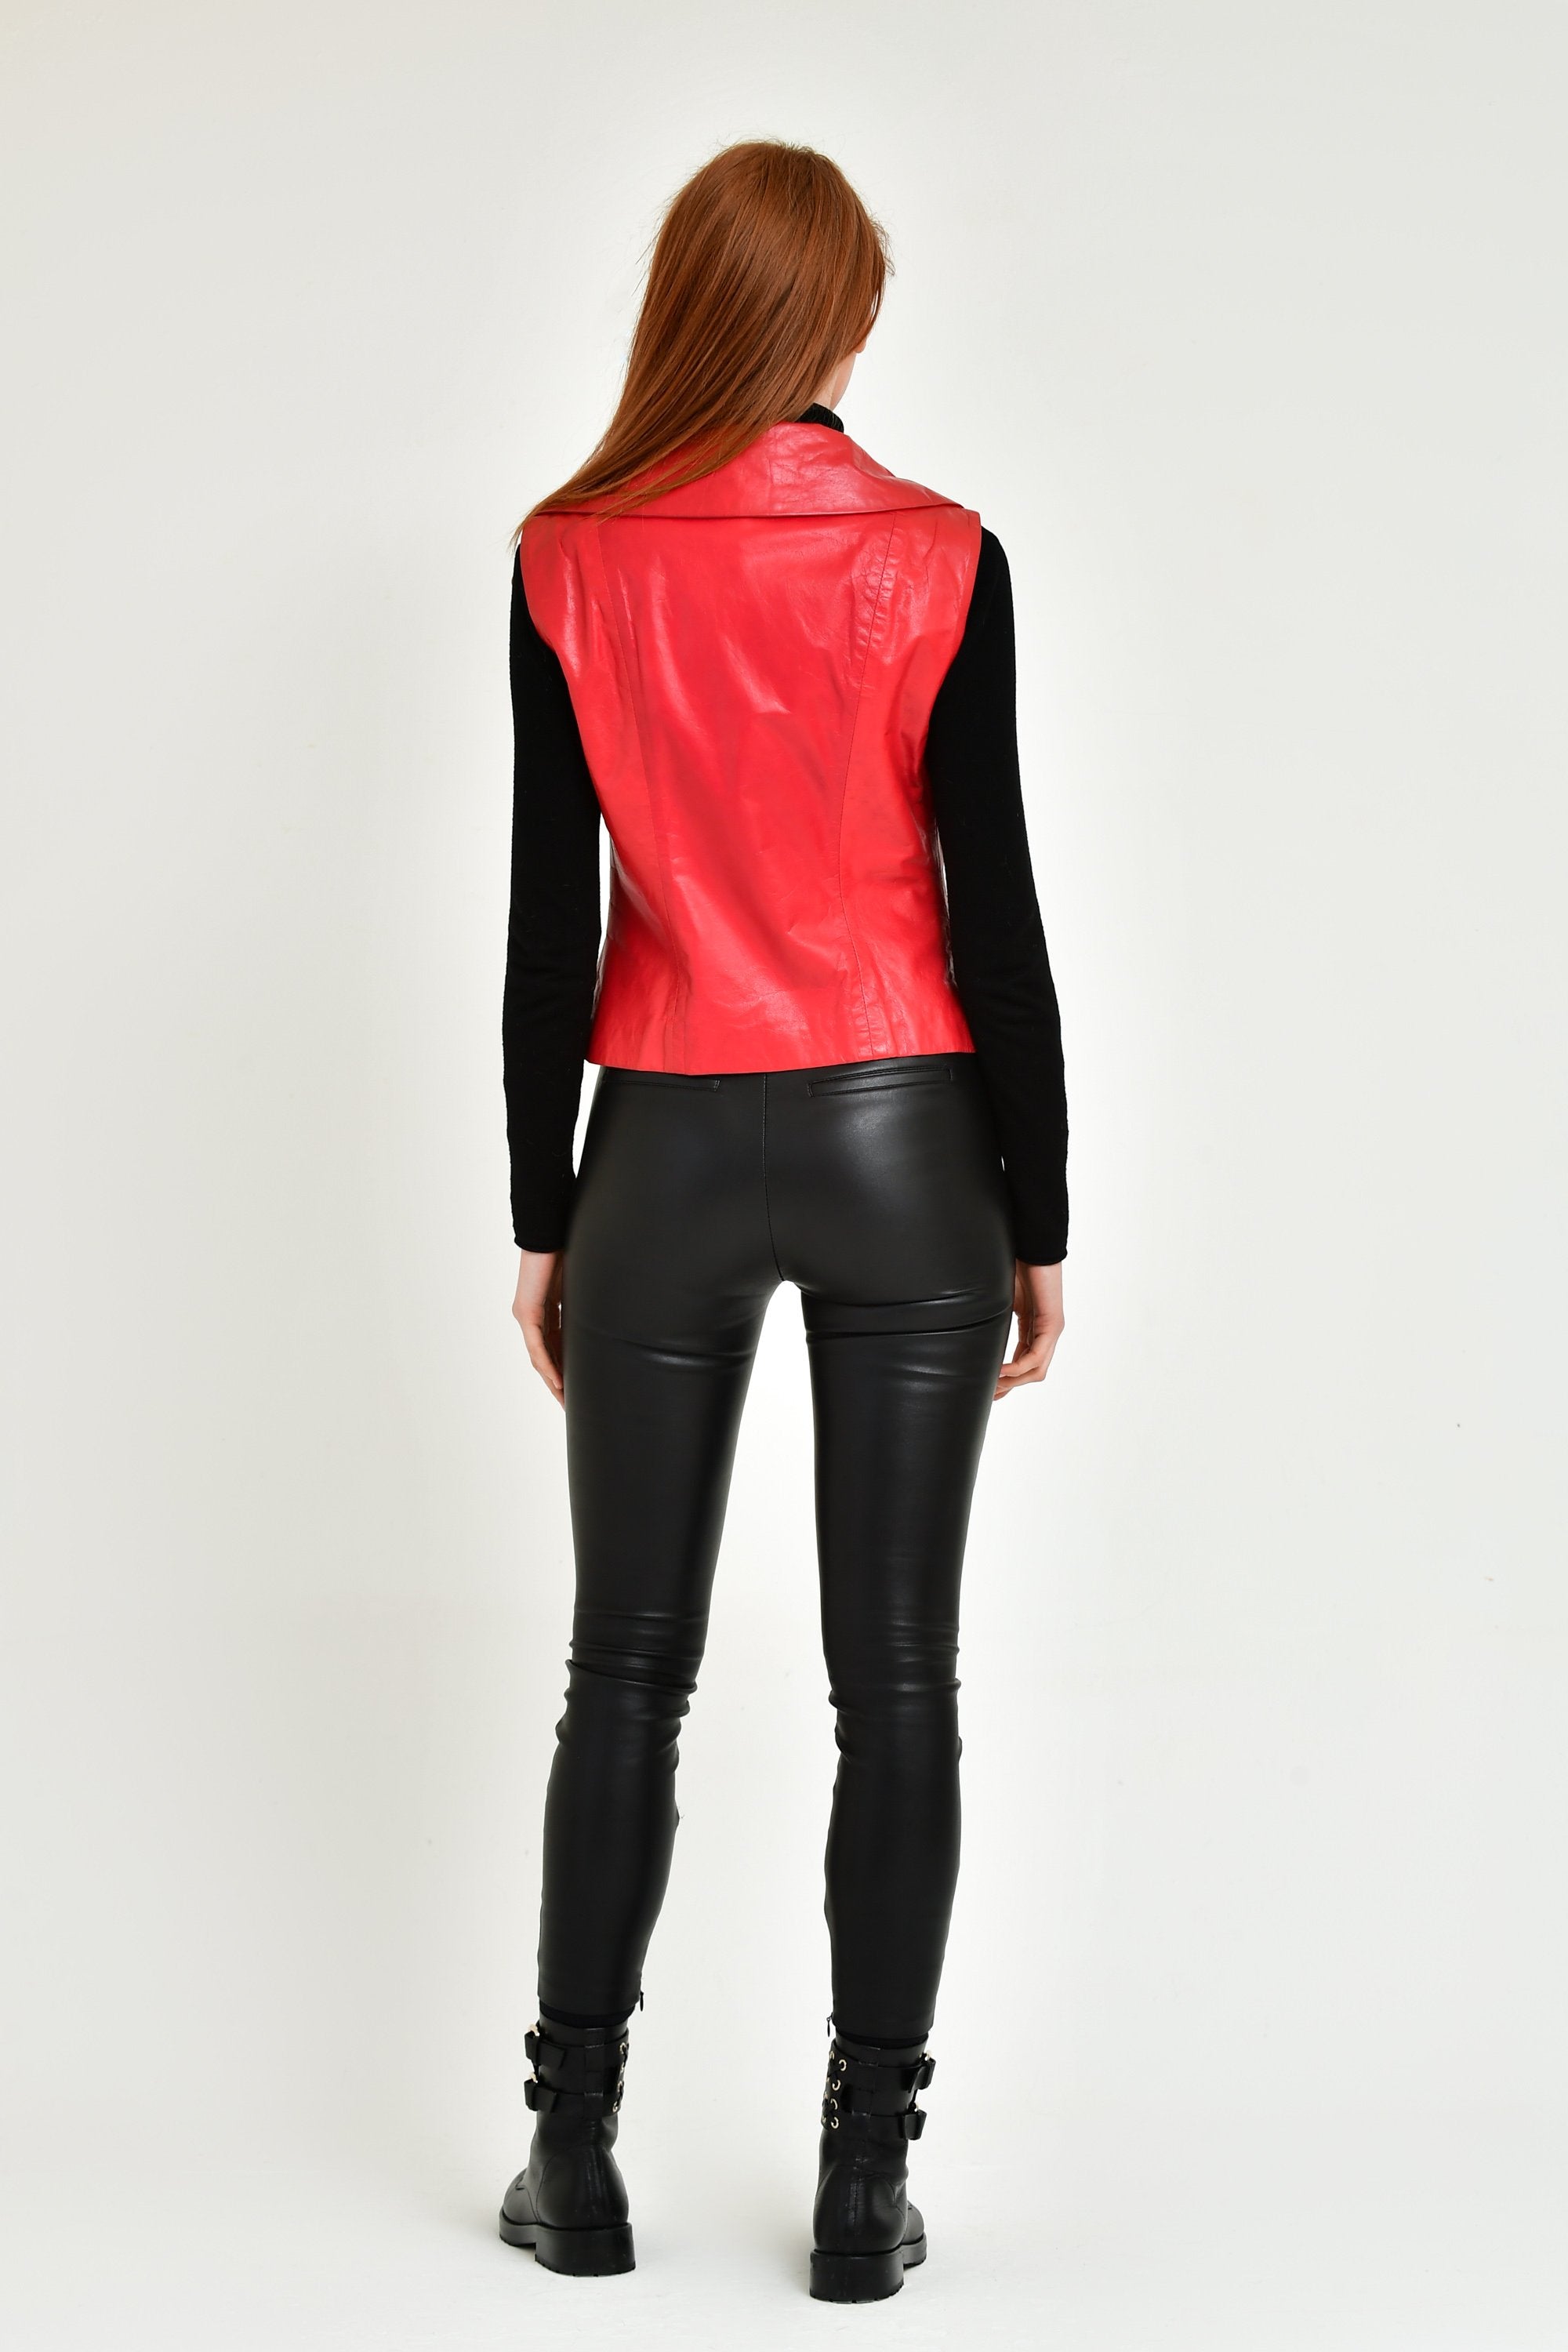 Red Leather Vest